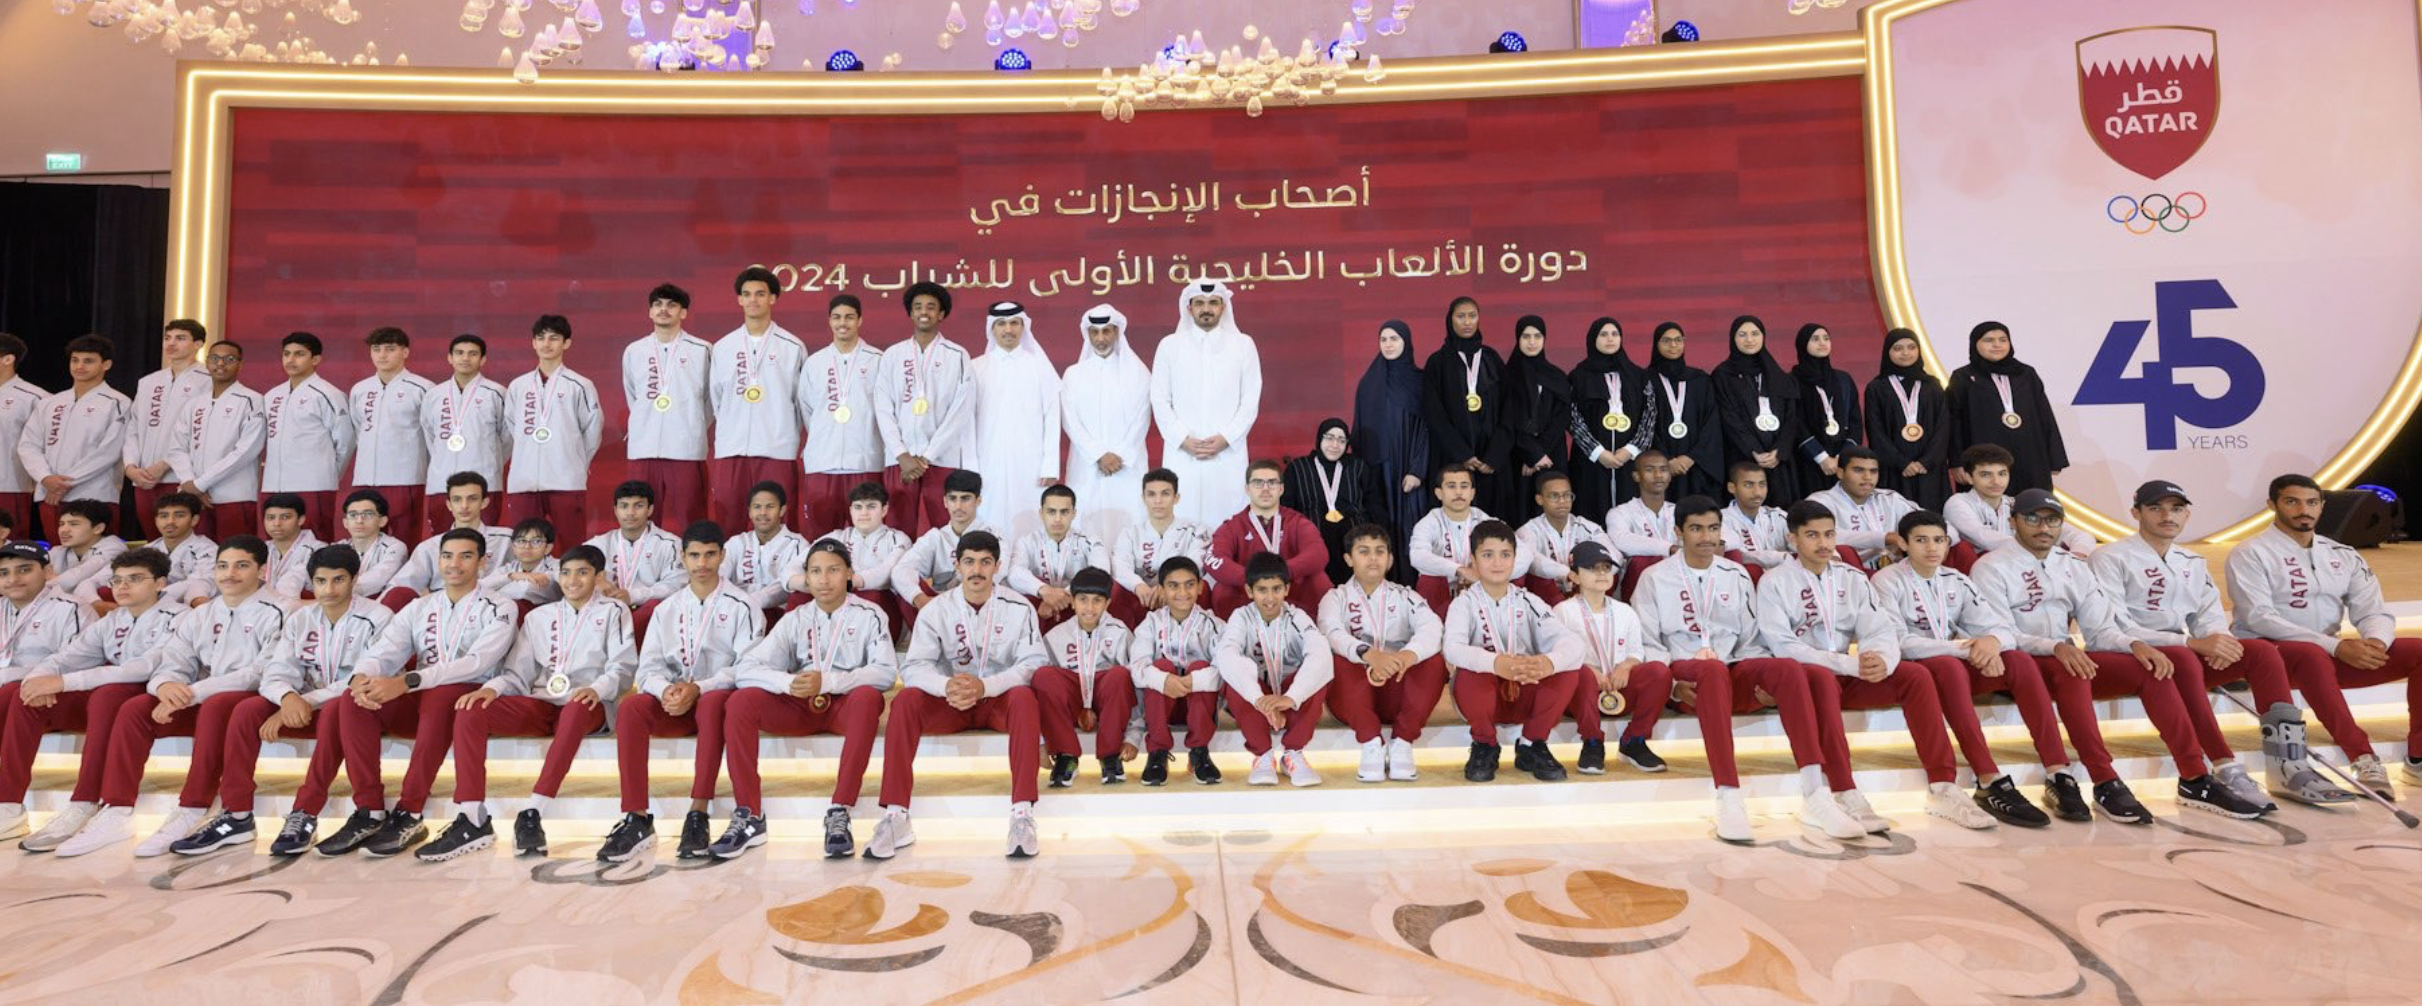 Qatar Olympic Committee celebrates 45th anniversary marking decades of accomplishments